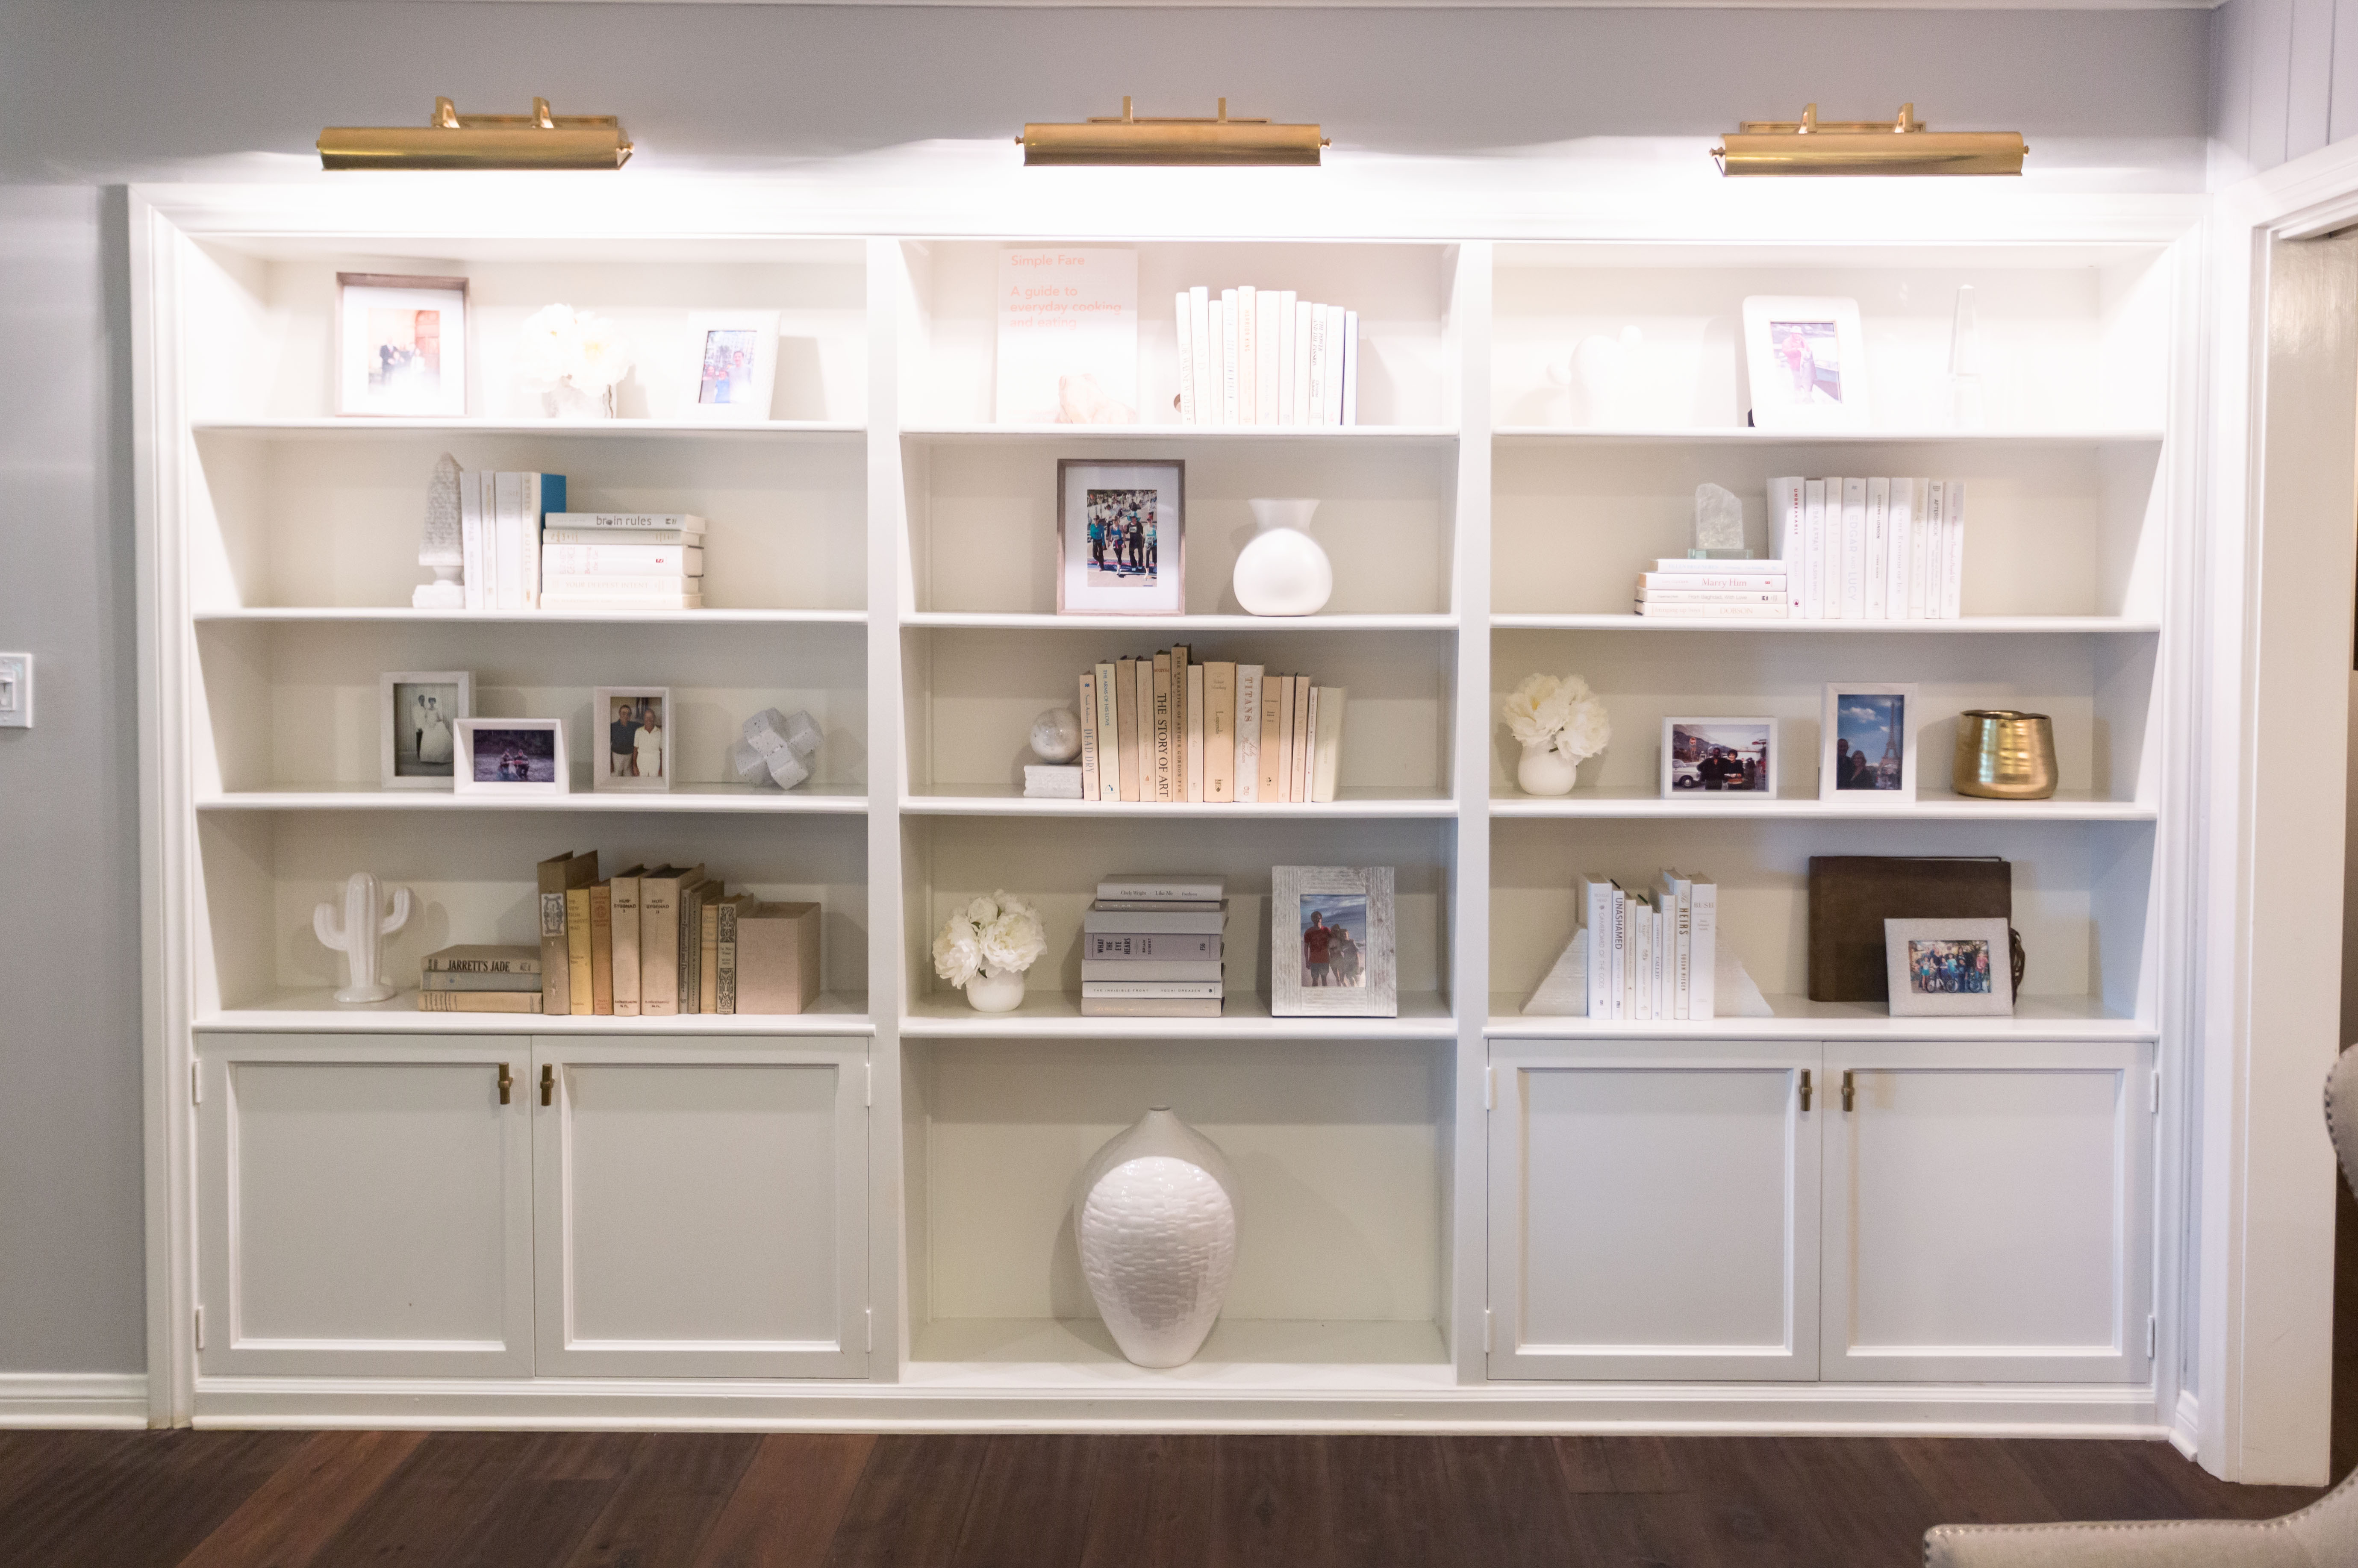 Bookshelf Styling: 5 Tips to Refresh Your Space Like a Pro